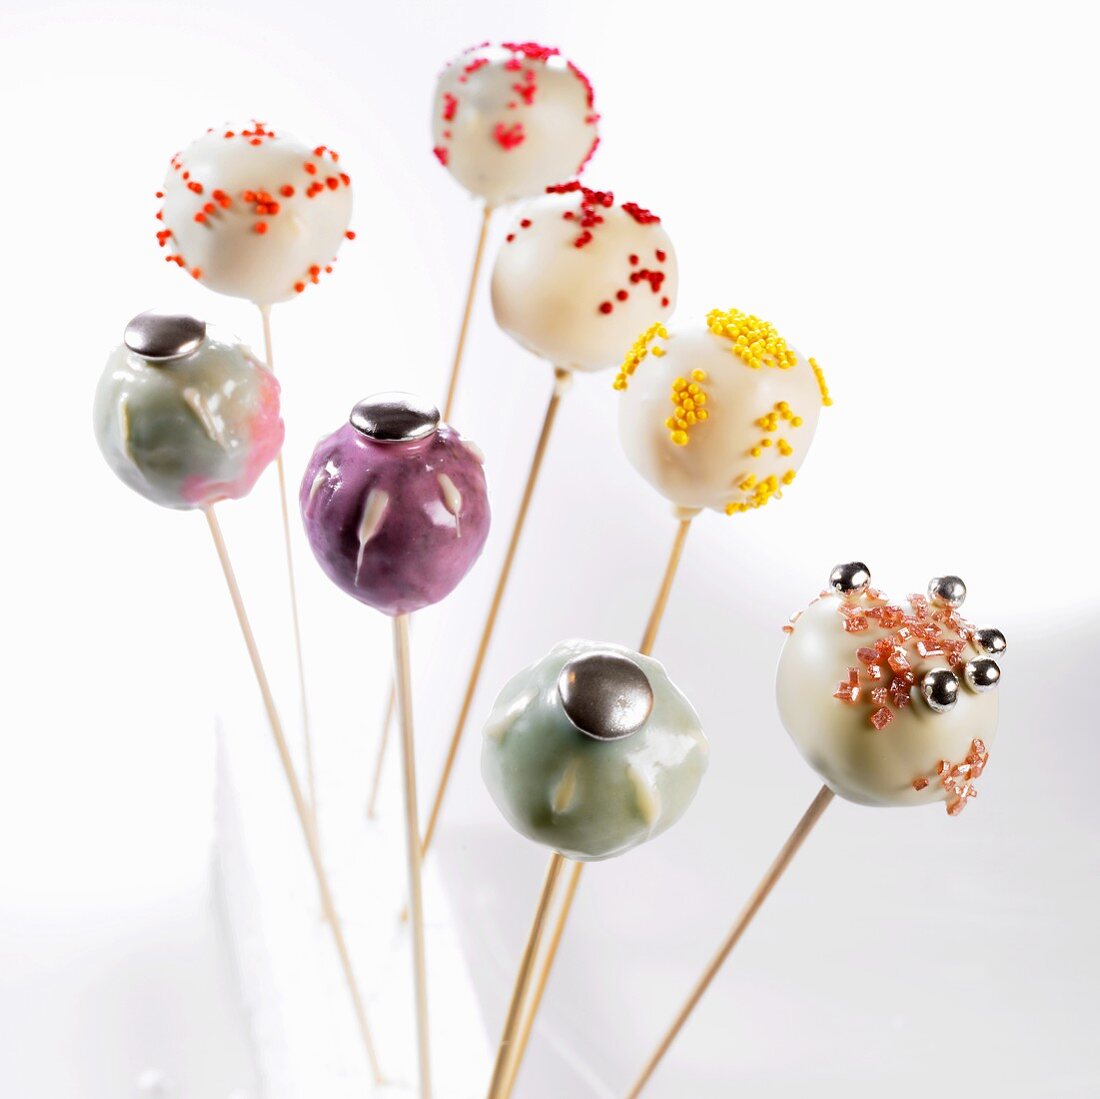 Eight different decorated cake pops